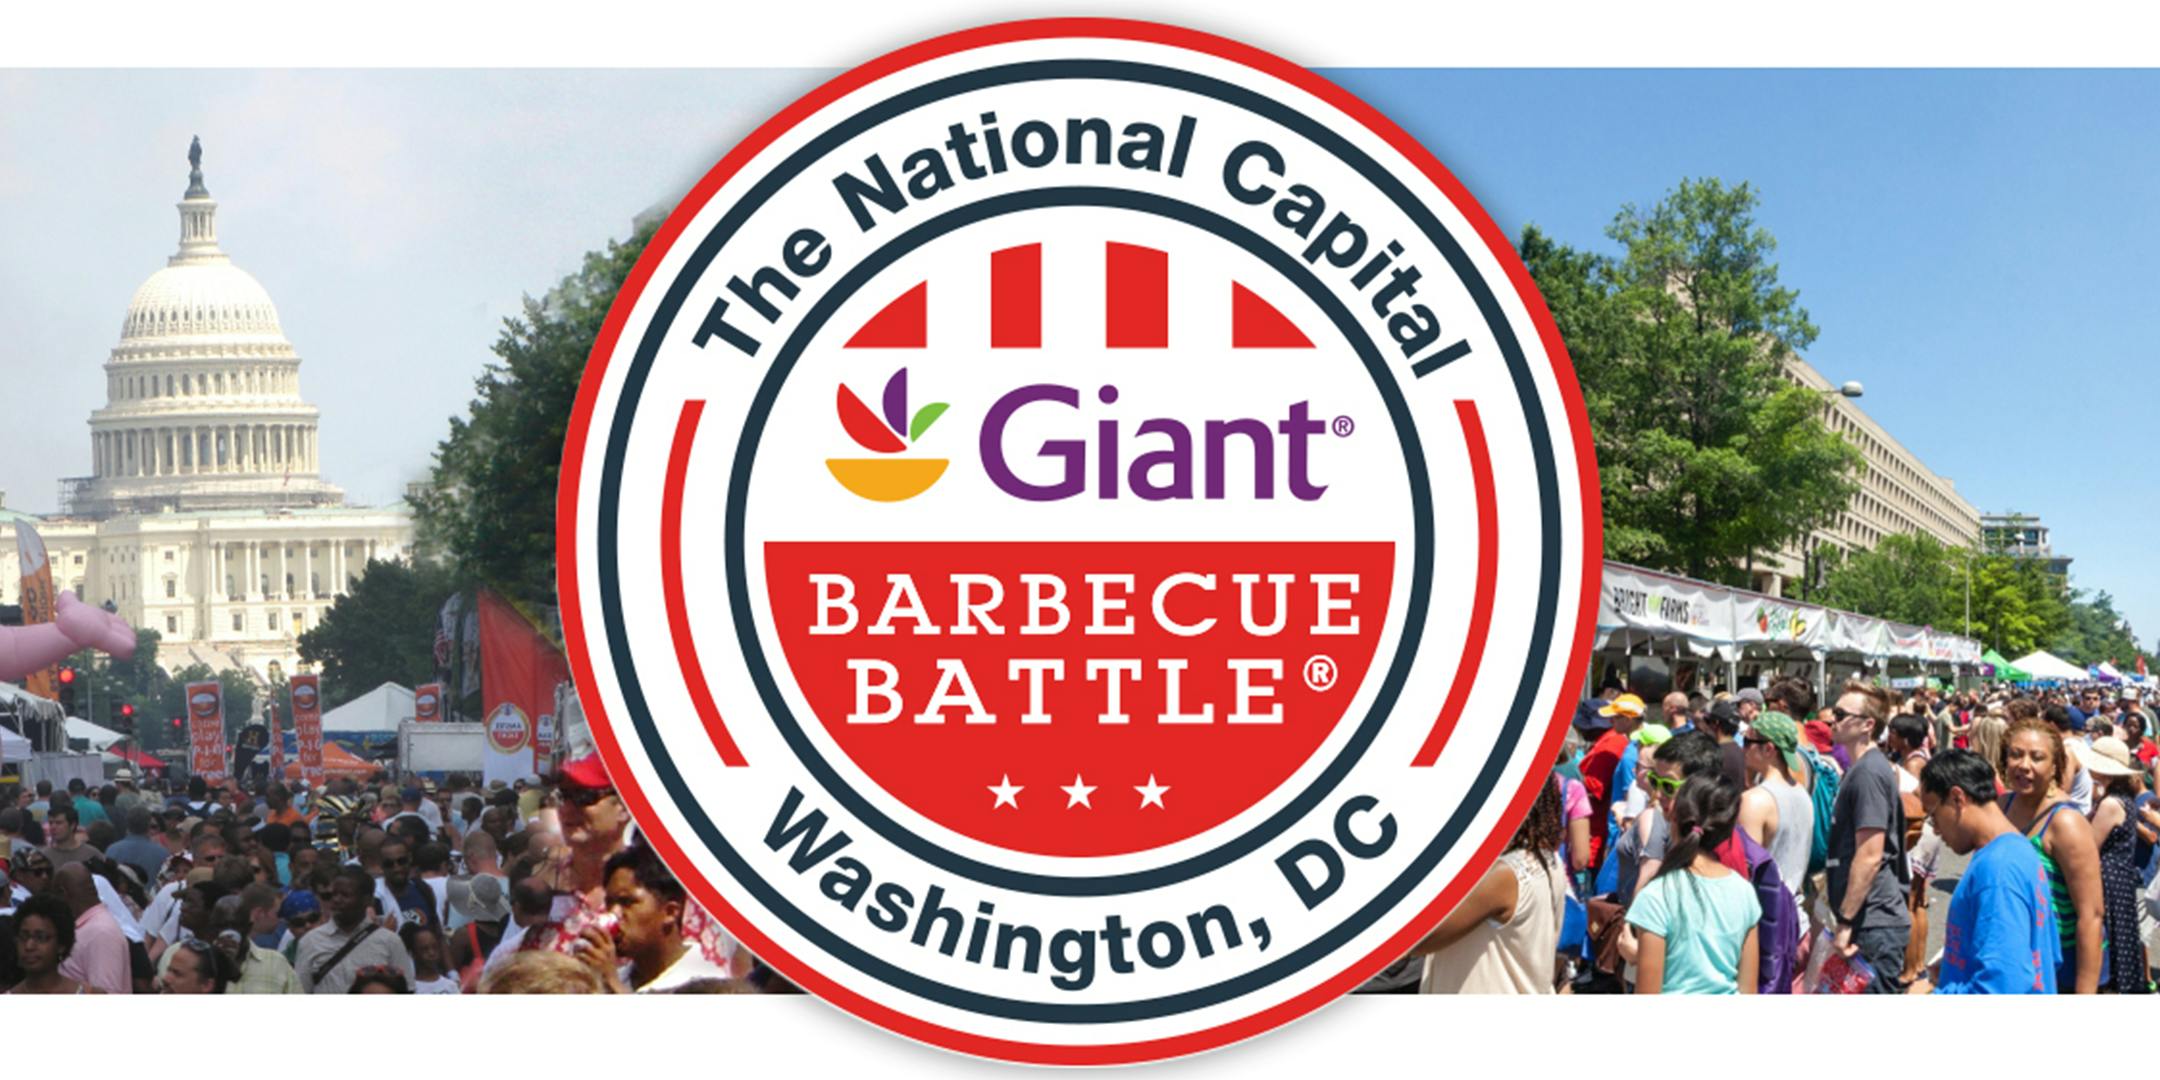 27th Annual Giant National Capital Barbecue Battle